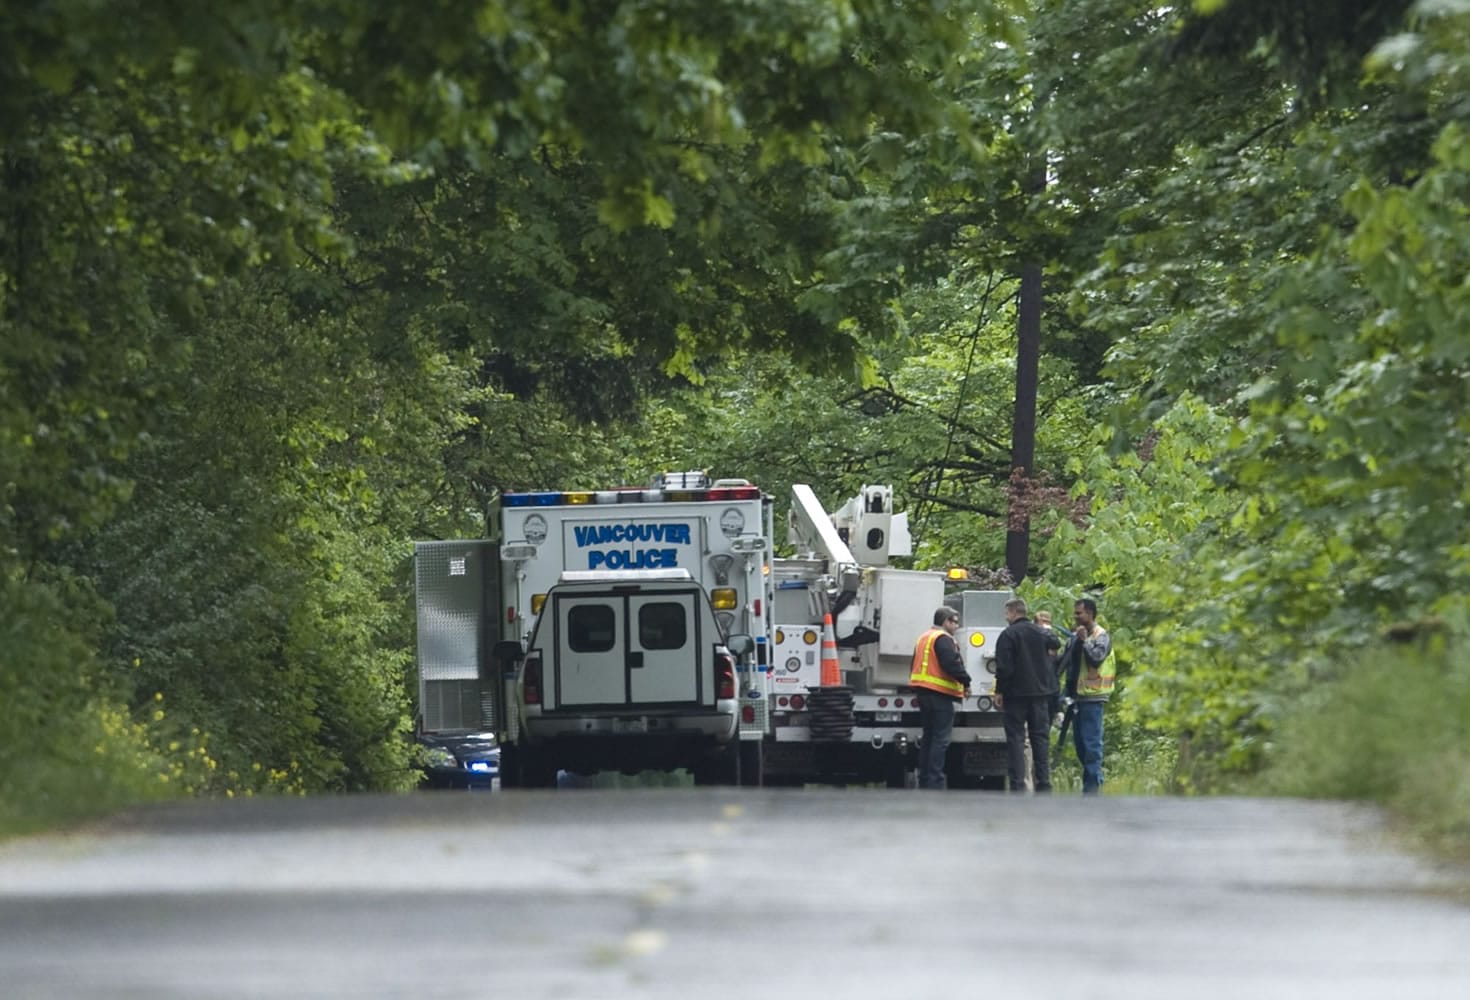 Vancouver police investigate the scene along the old Evergreen Highway where a woman's body was recovered early Thursday.